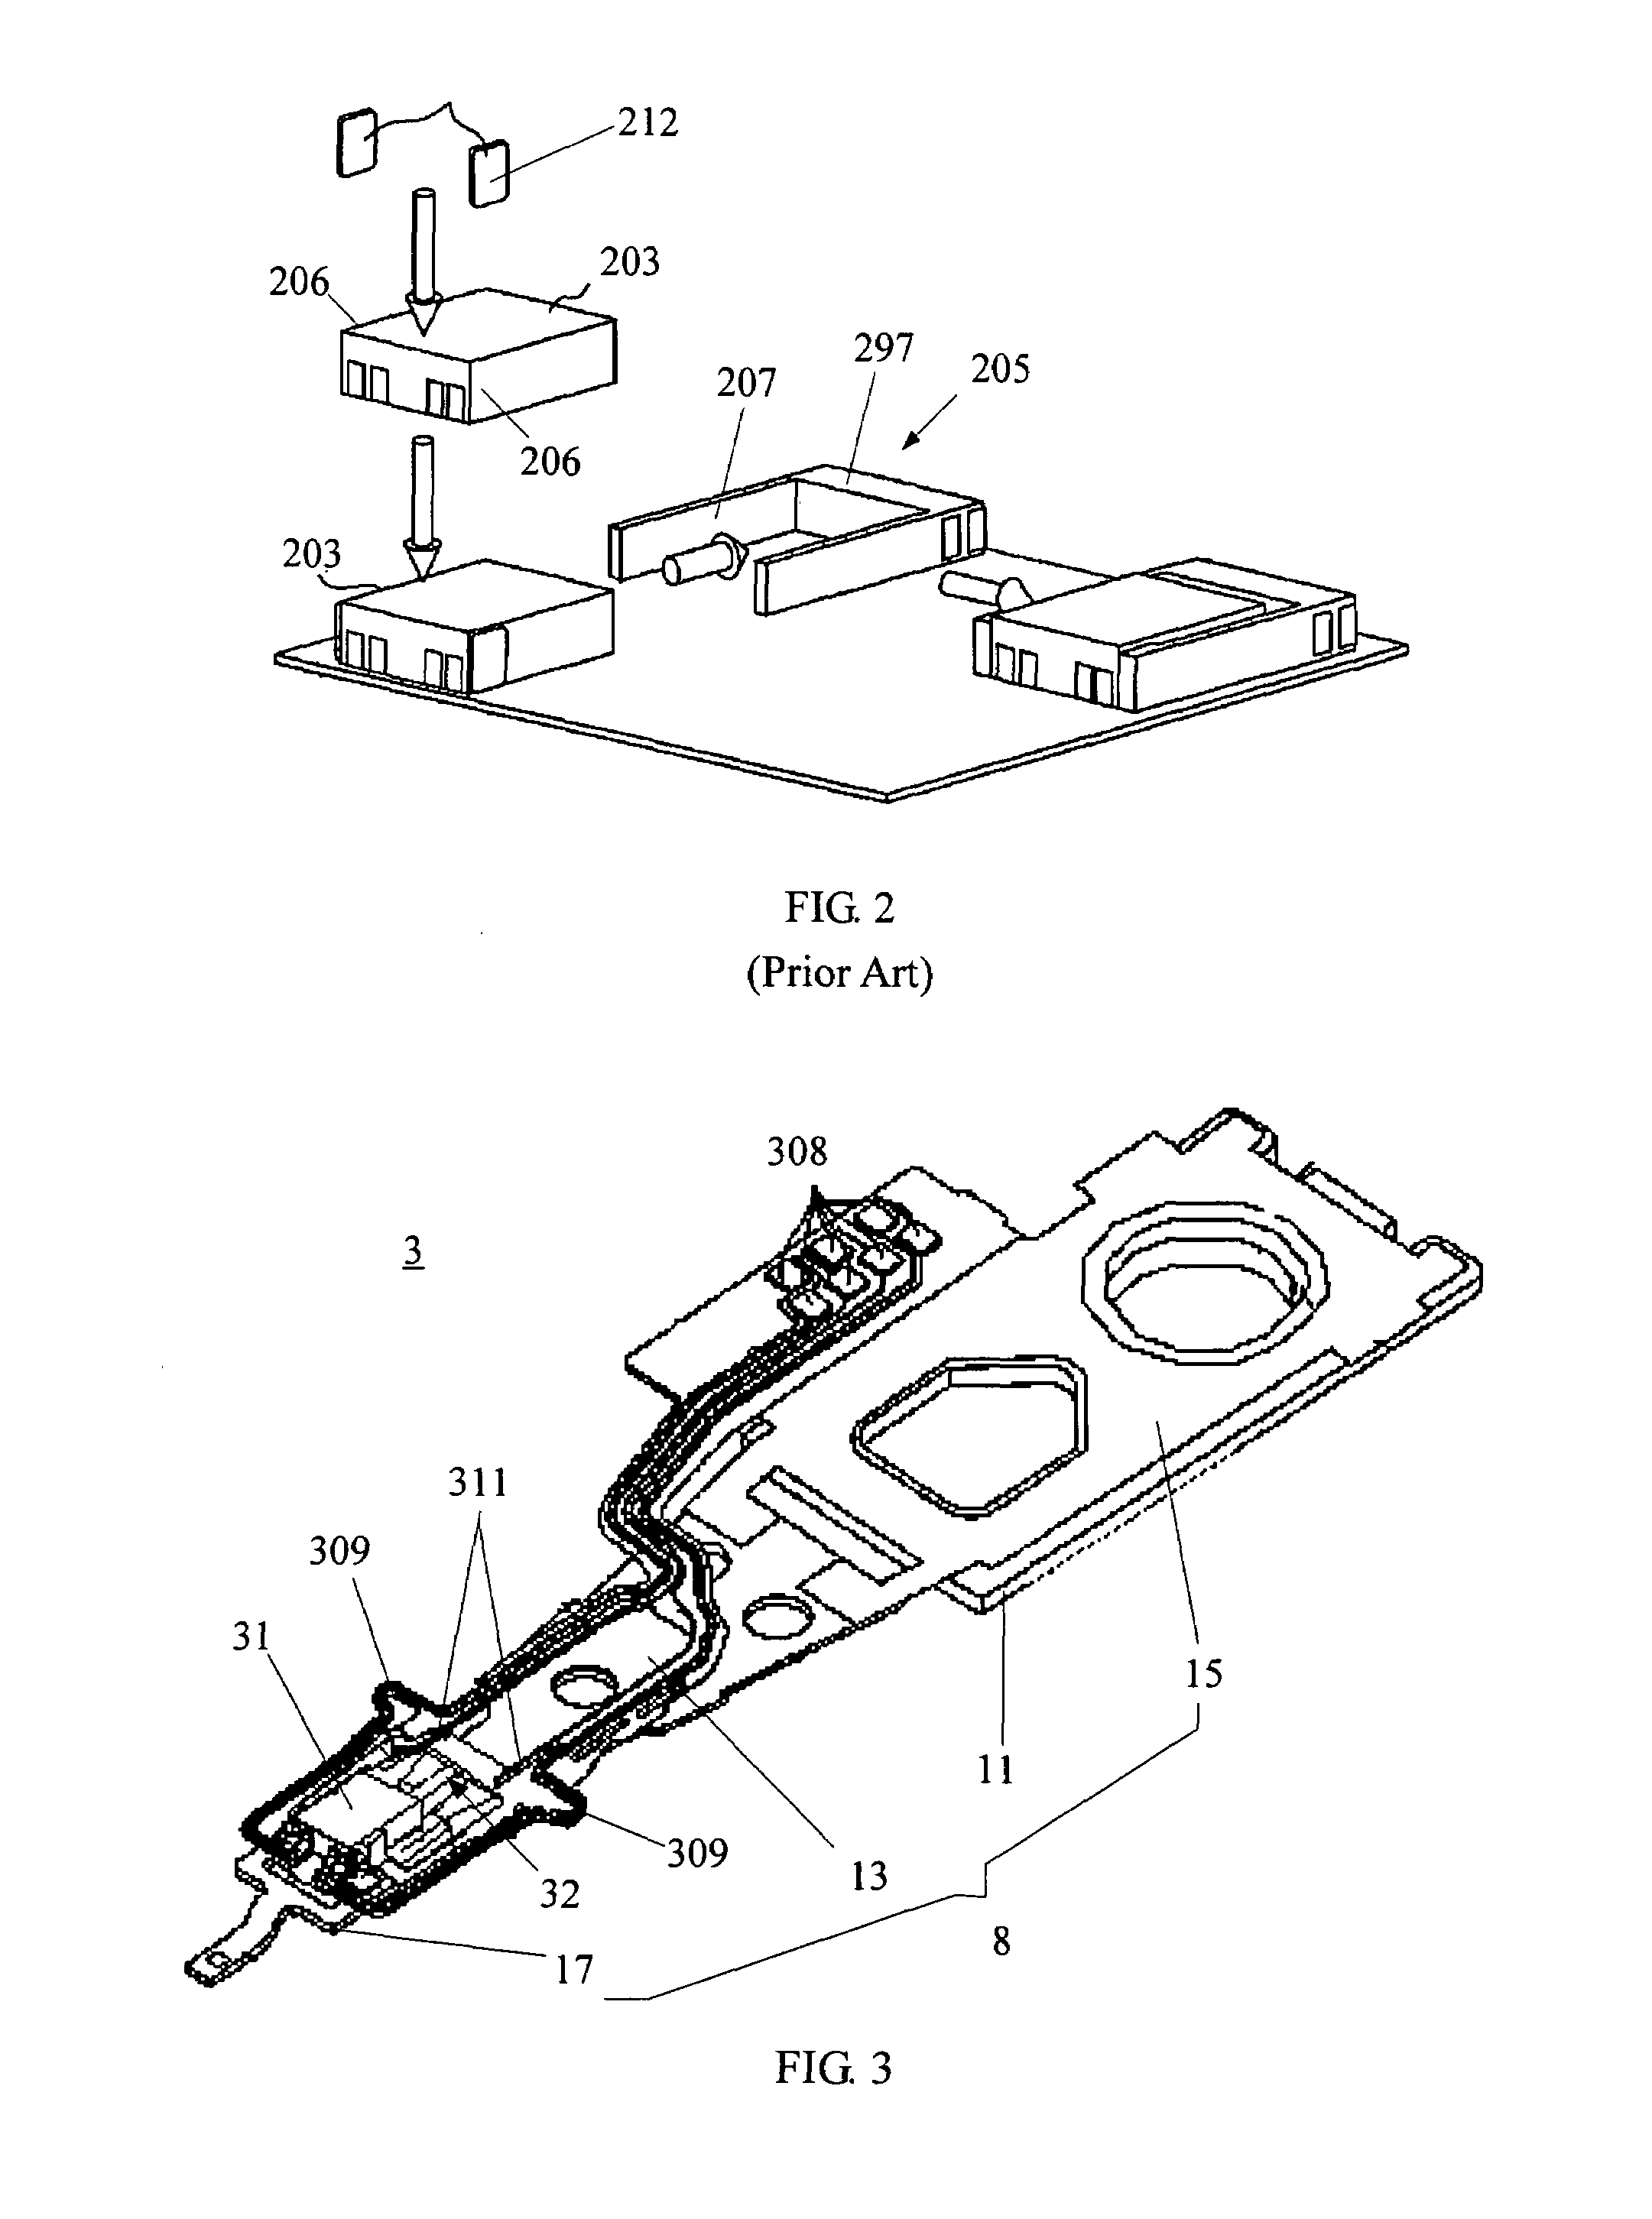 Sway-type micro-actuator with slider holding arms for a disk drive head gimbal assembly